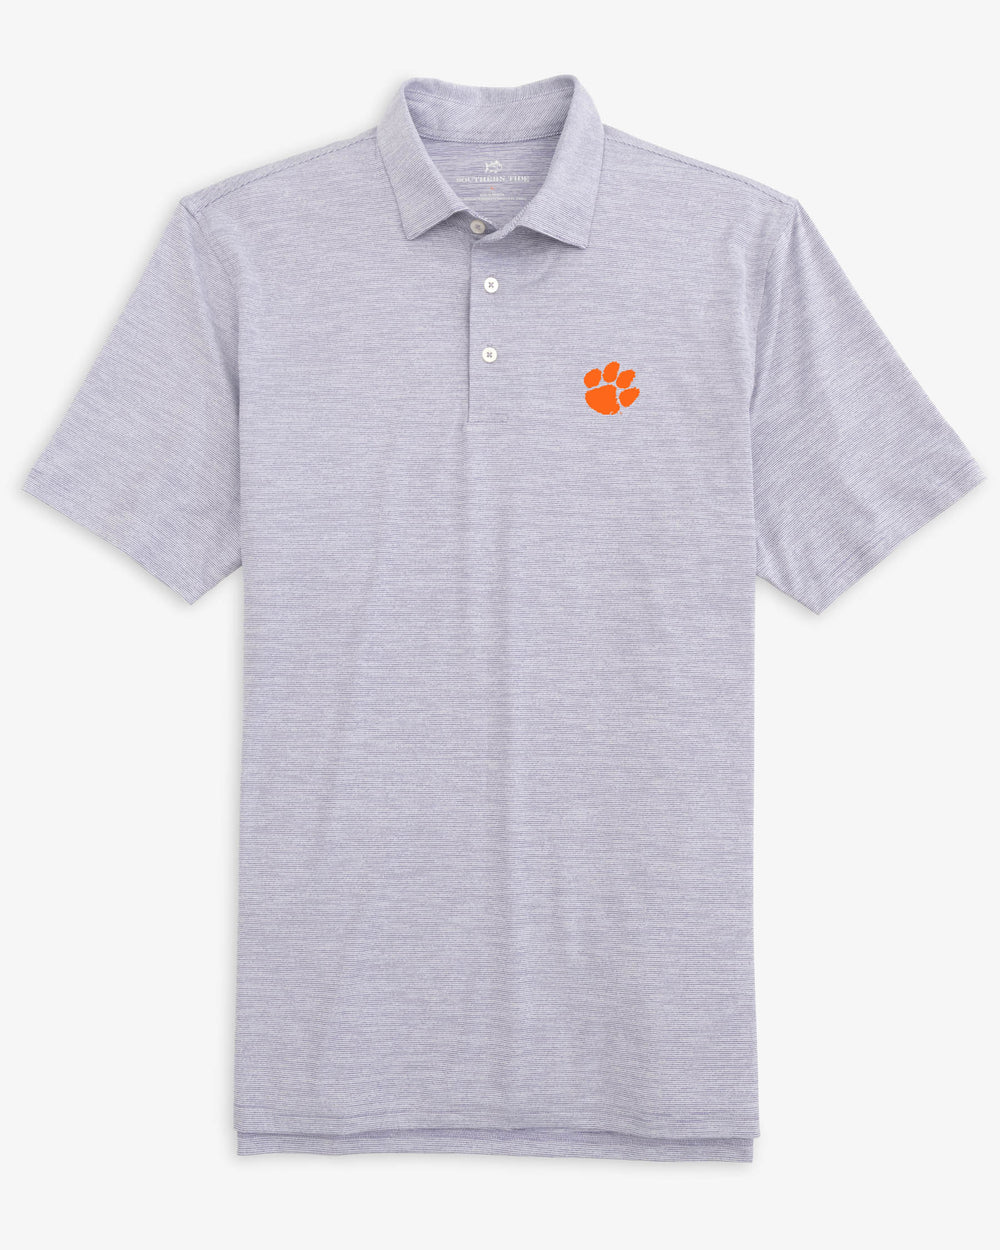 The front view of the Clemson Tigers Driver Spacedye Polo Shirt by Southern Tide - Regal Purple